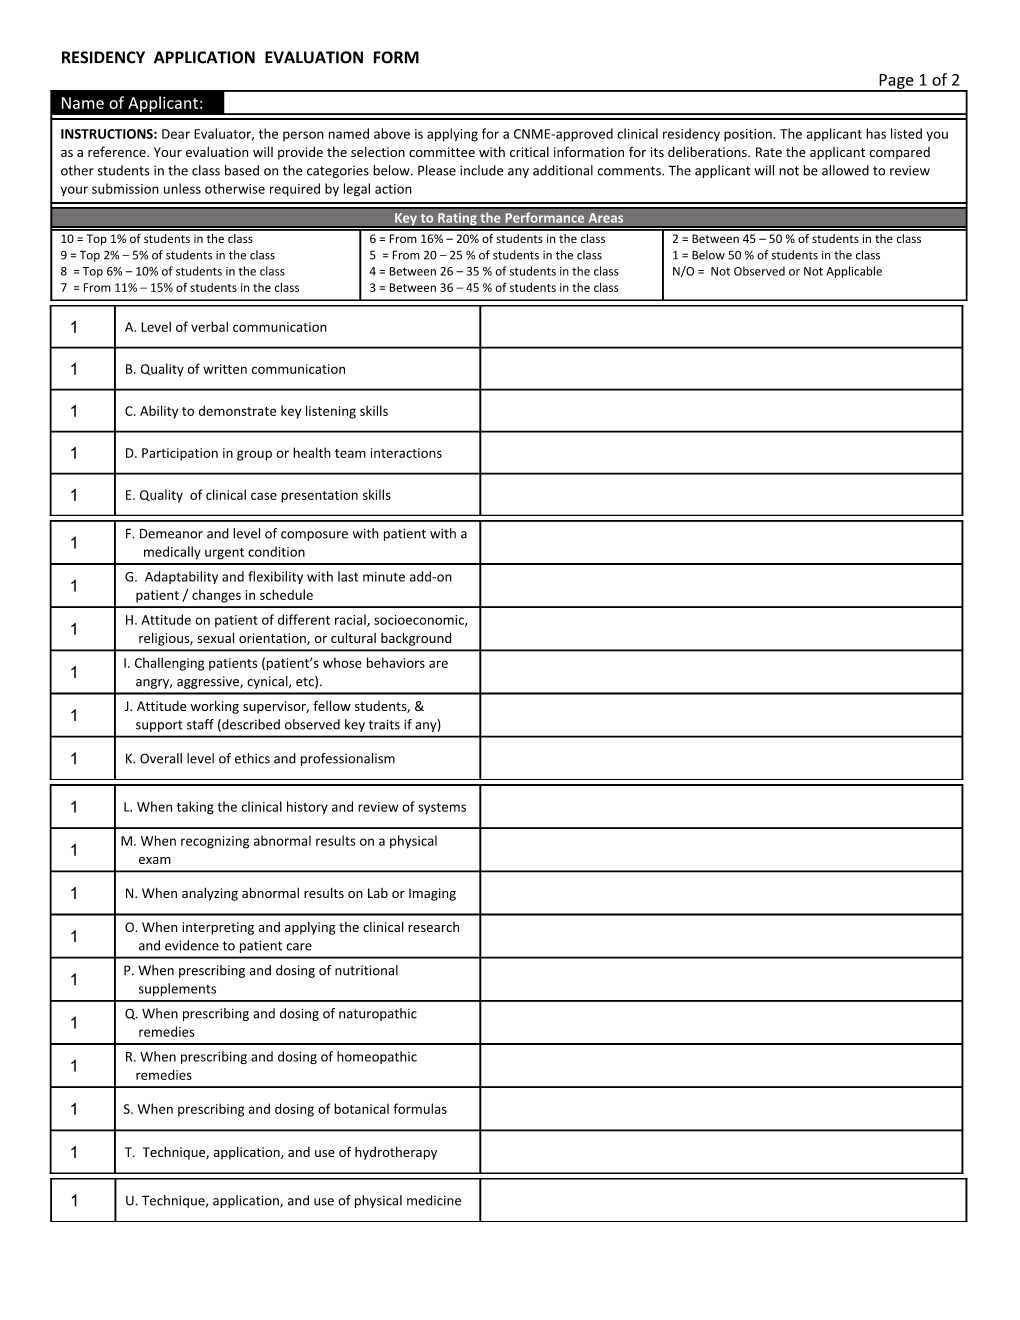 Residency Application Evaluation Form Page 2 of 2